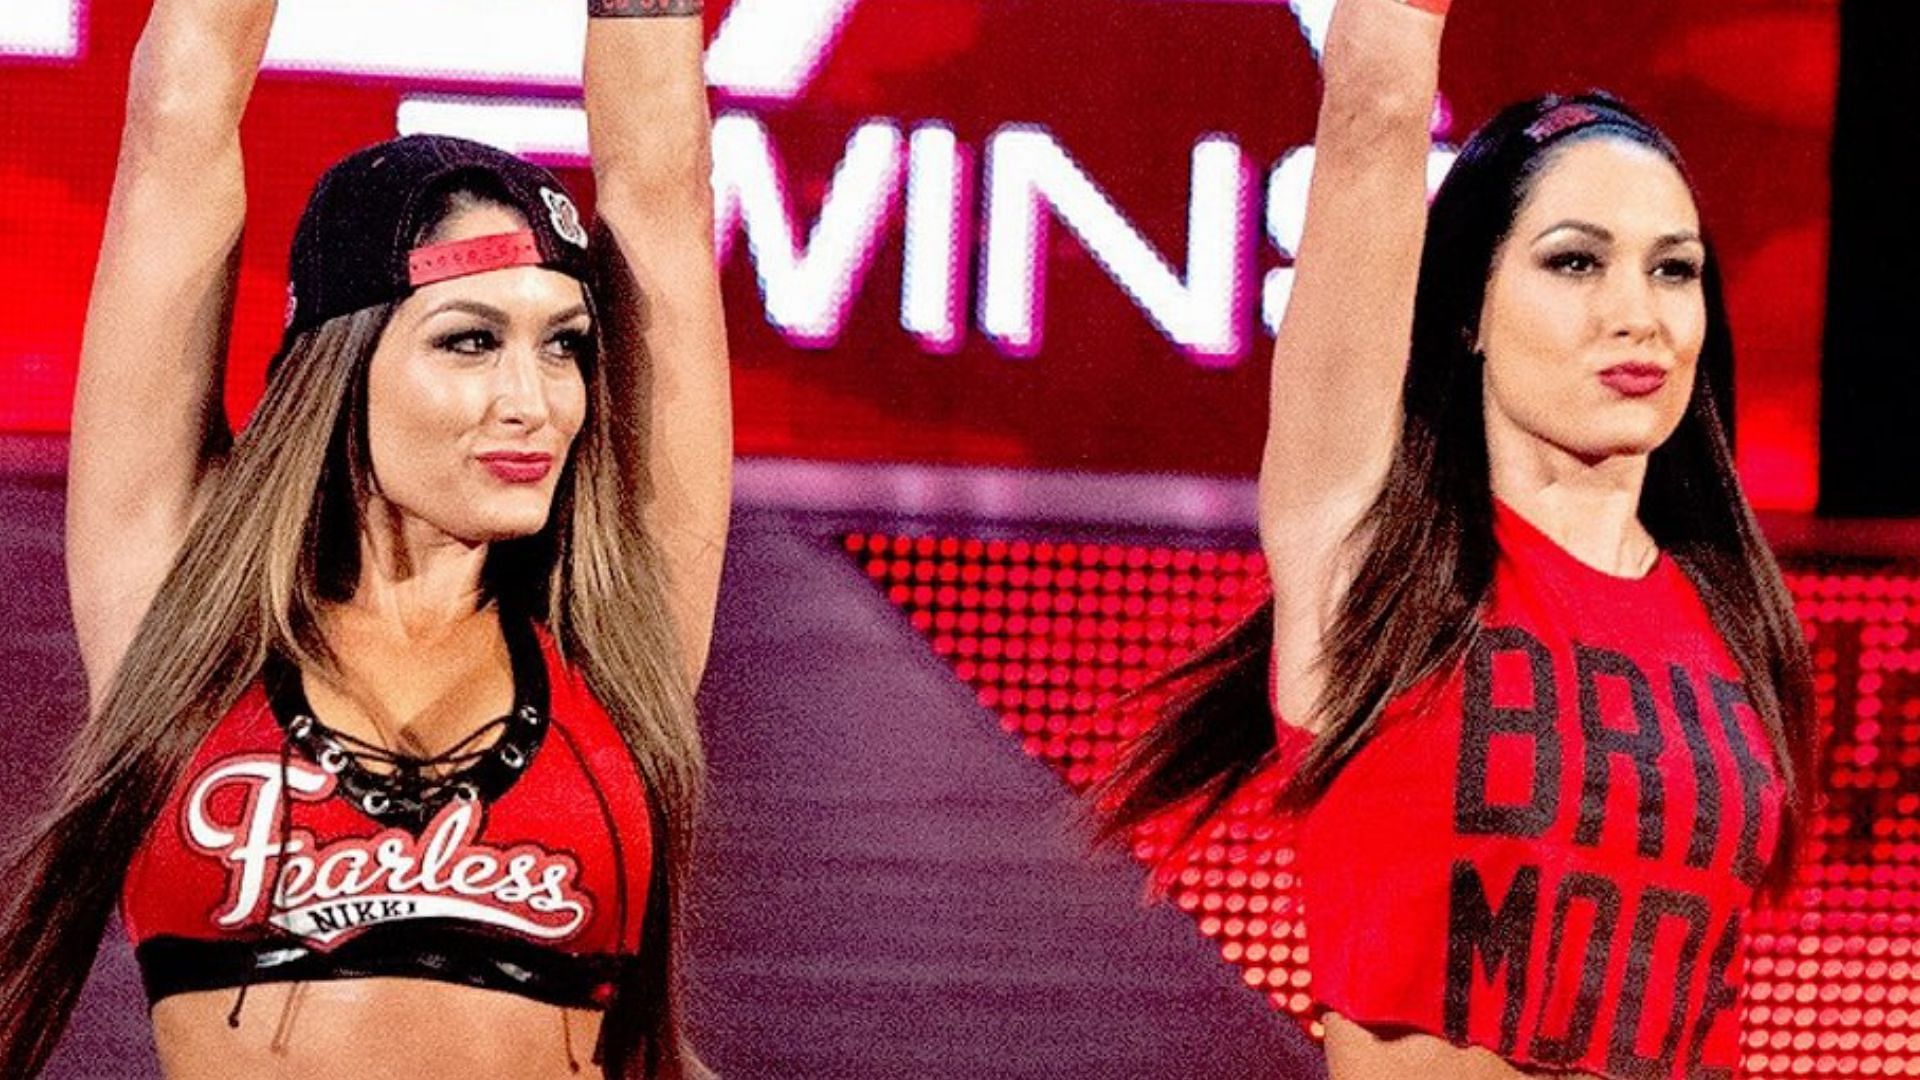 The Bella Twins at a WWE event